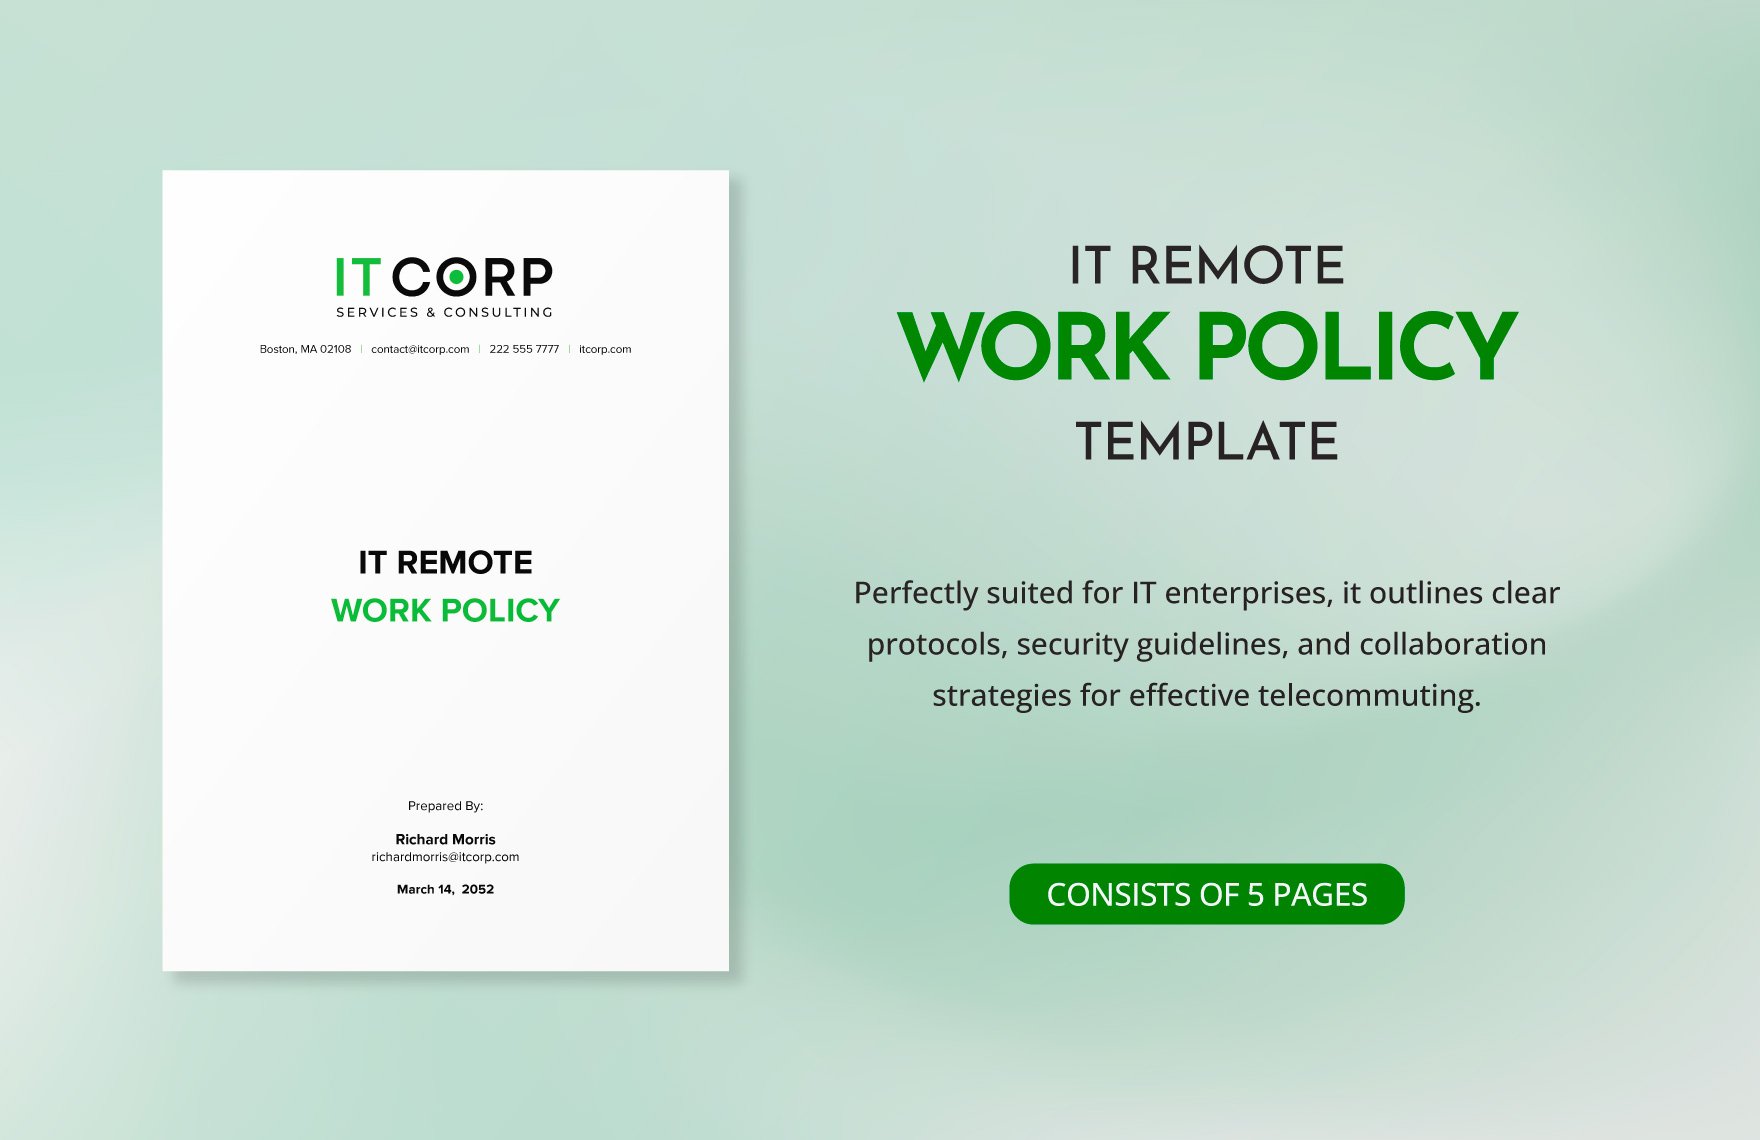 IT Remote Work Policy Template